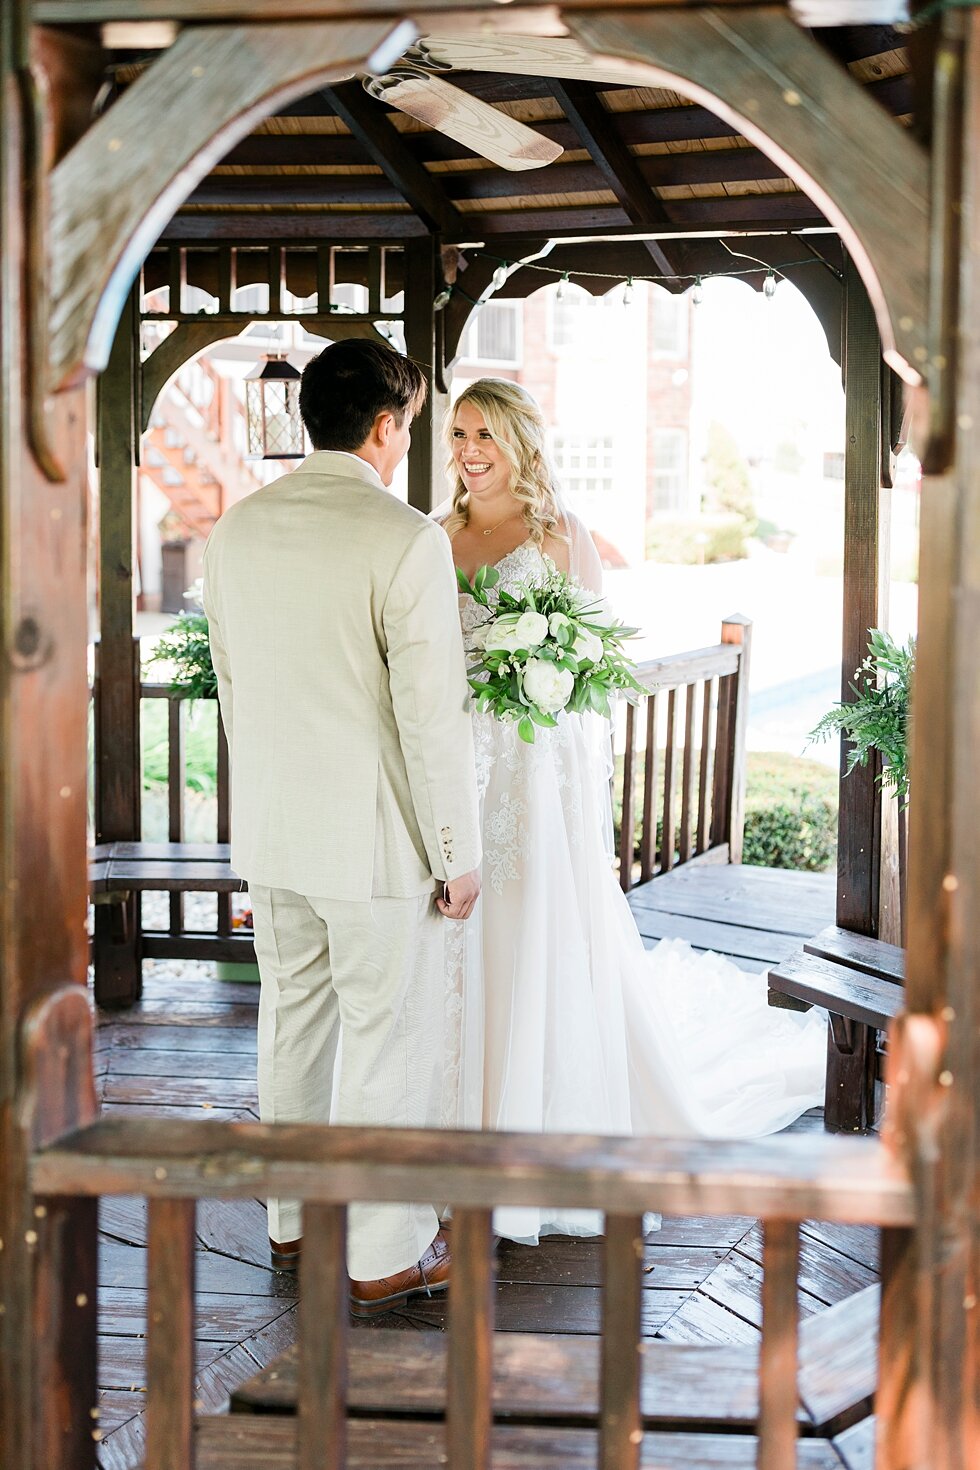  Meeting under the beautiful backyard gazebo was perfect for this couple. Romantic casual lace wedding gown close friends neutral colors background wedding natural greenery crisp white #midwestphotographer #kywedding #louisville #kentuckywedding #lou